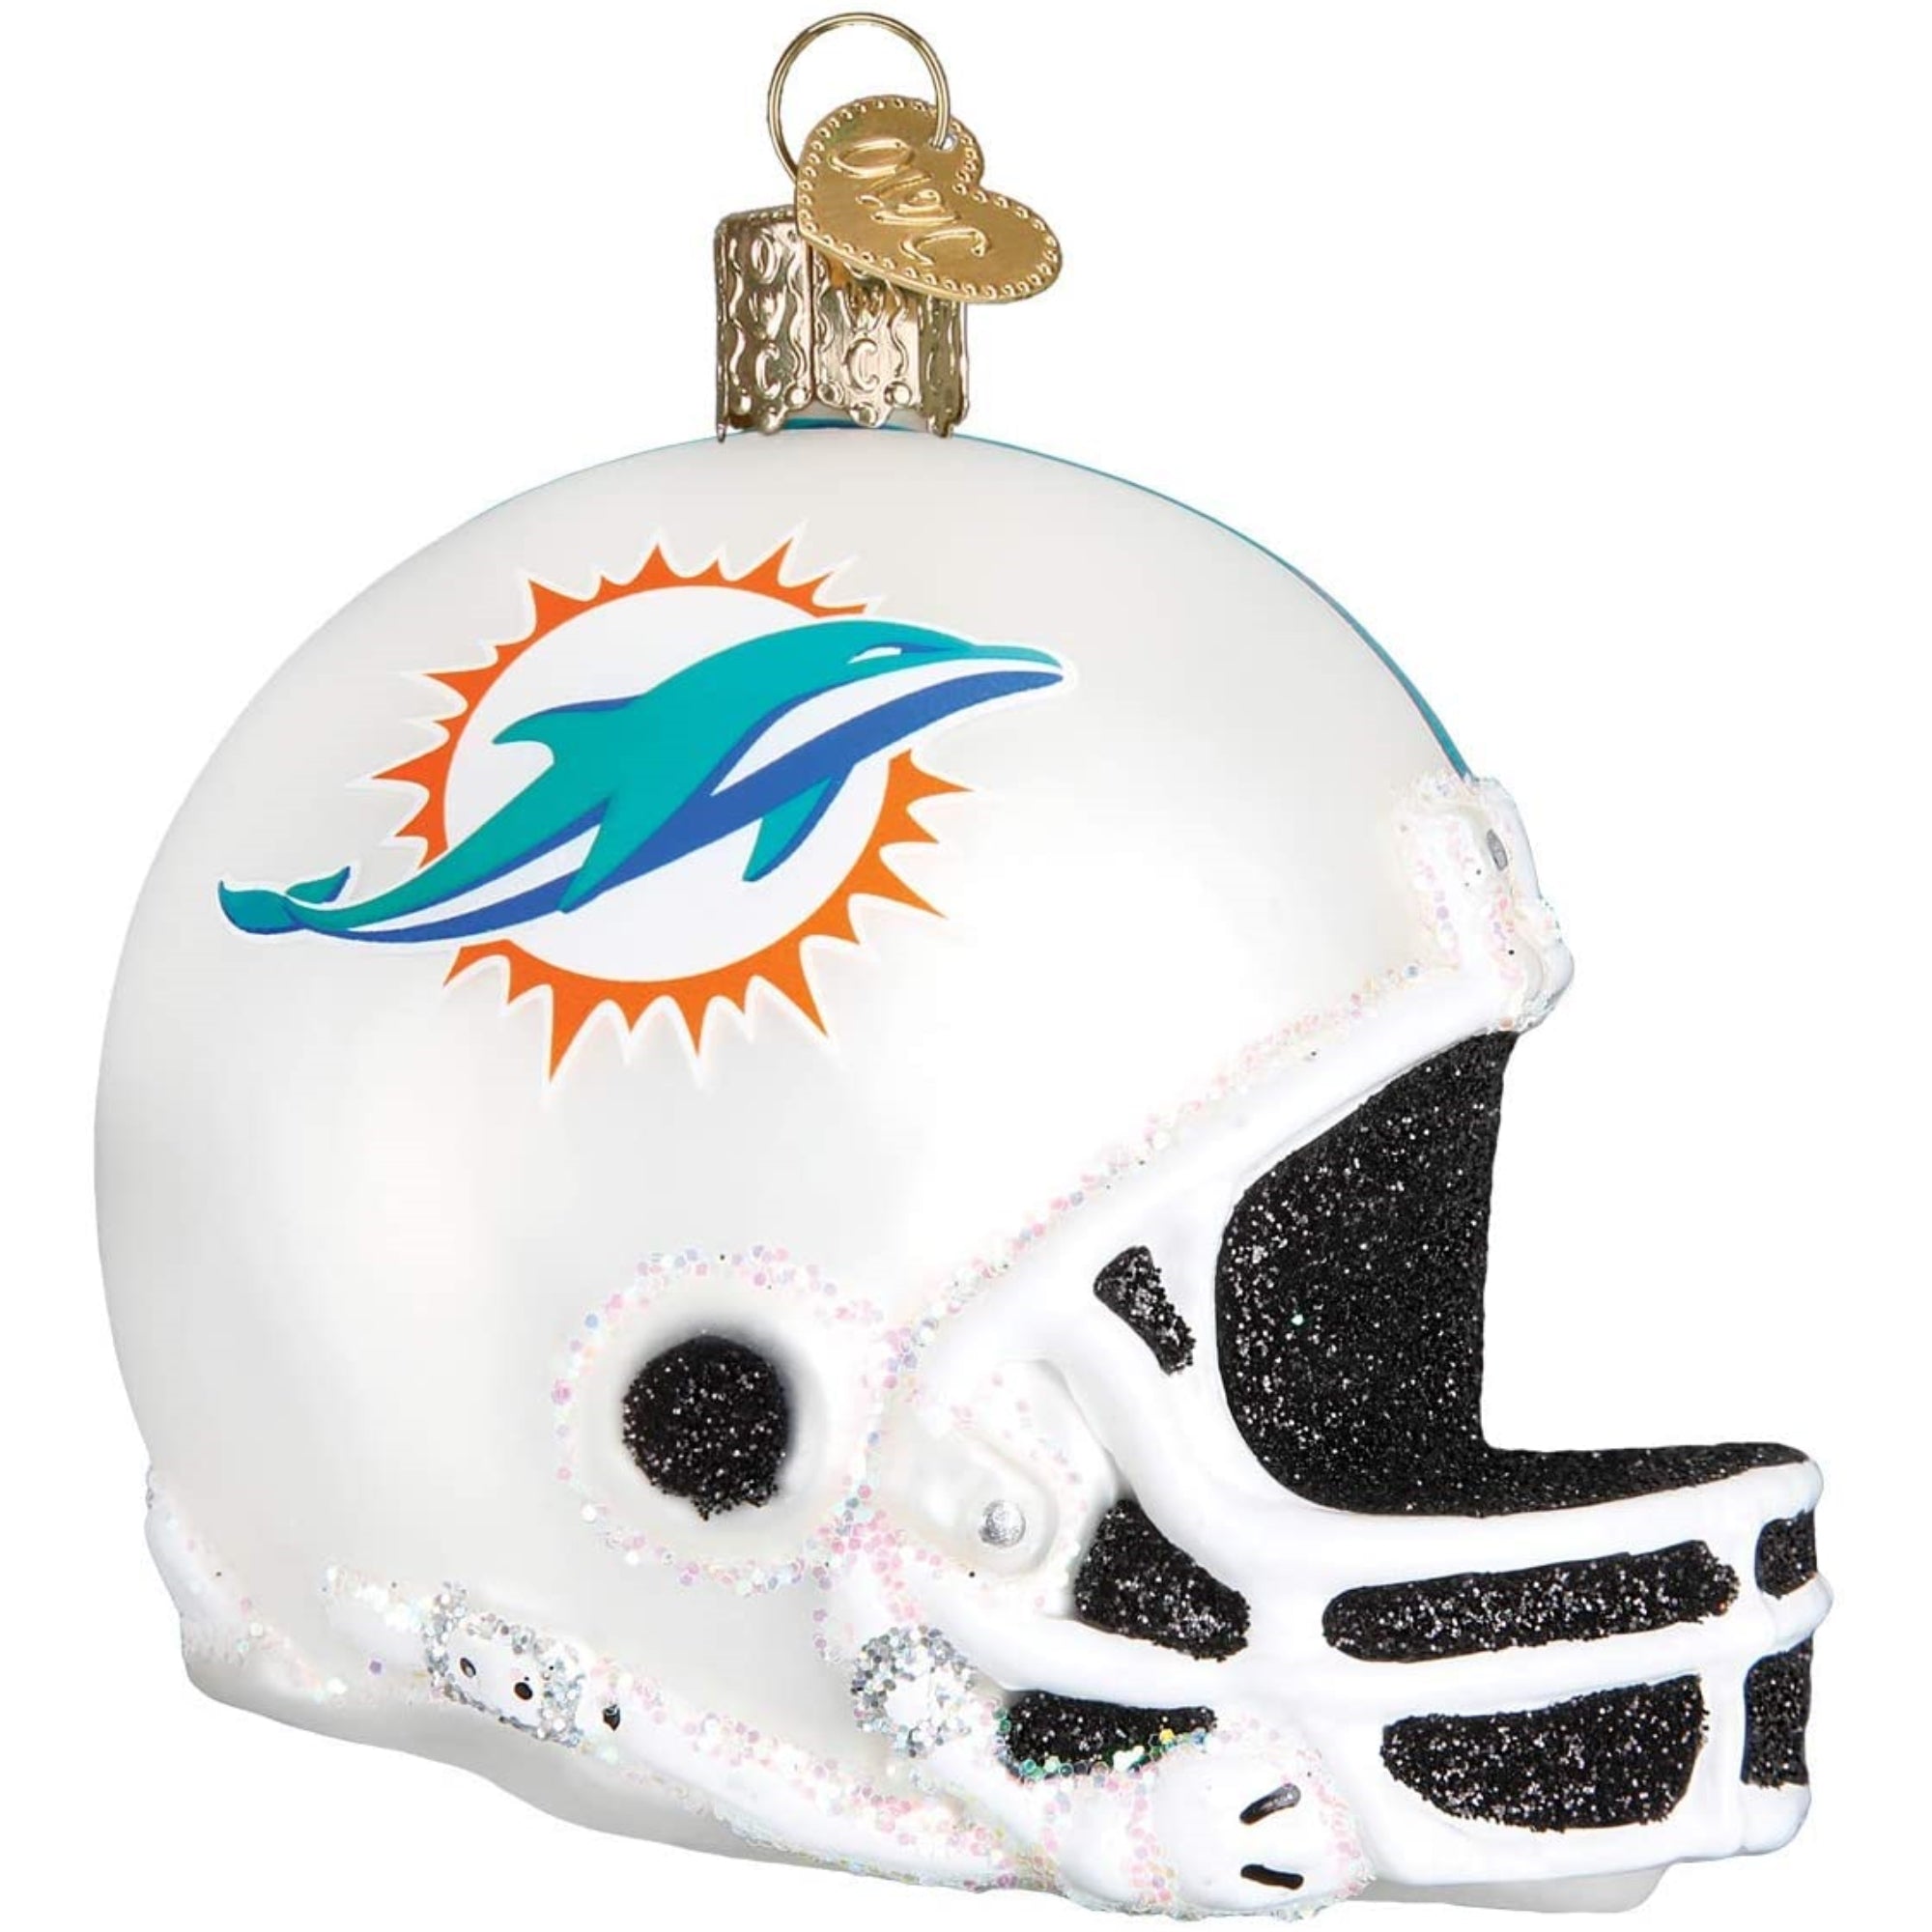 Old World Christmas Miami Dolphins Helmet Ornament For Christmas Tree